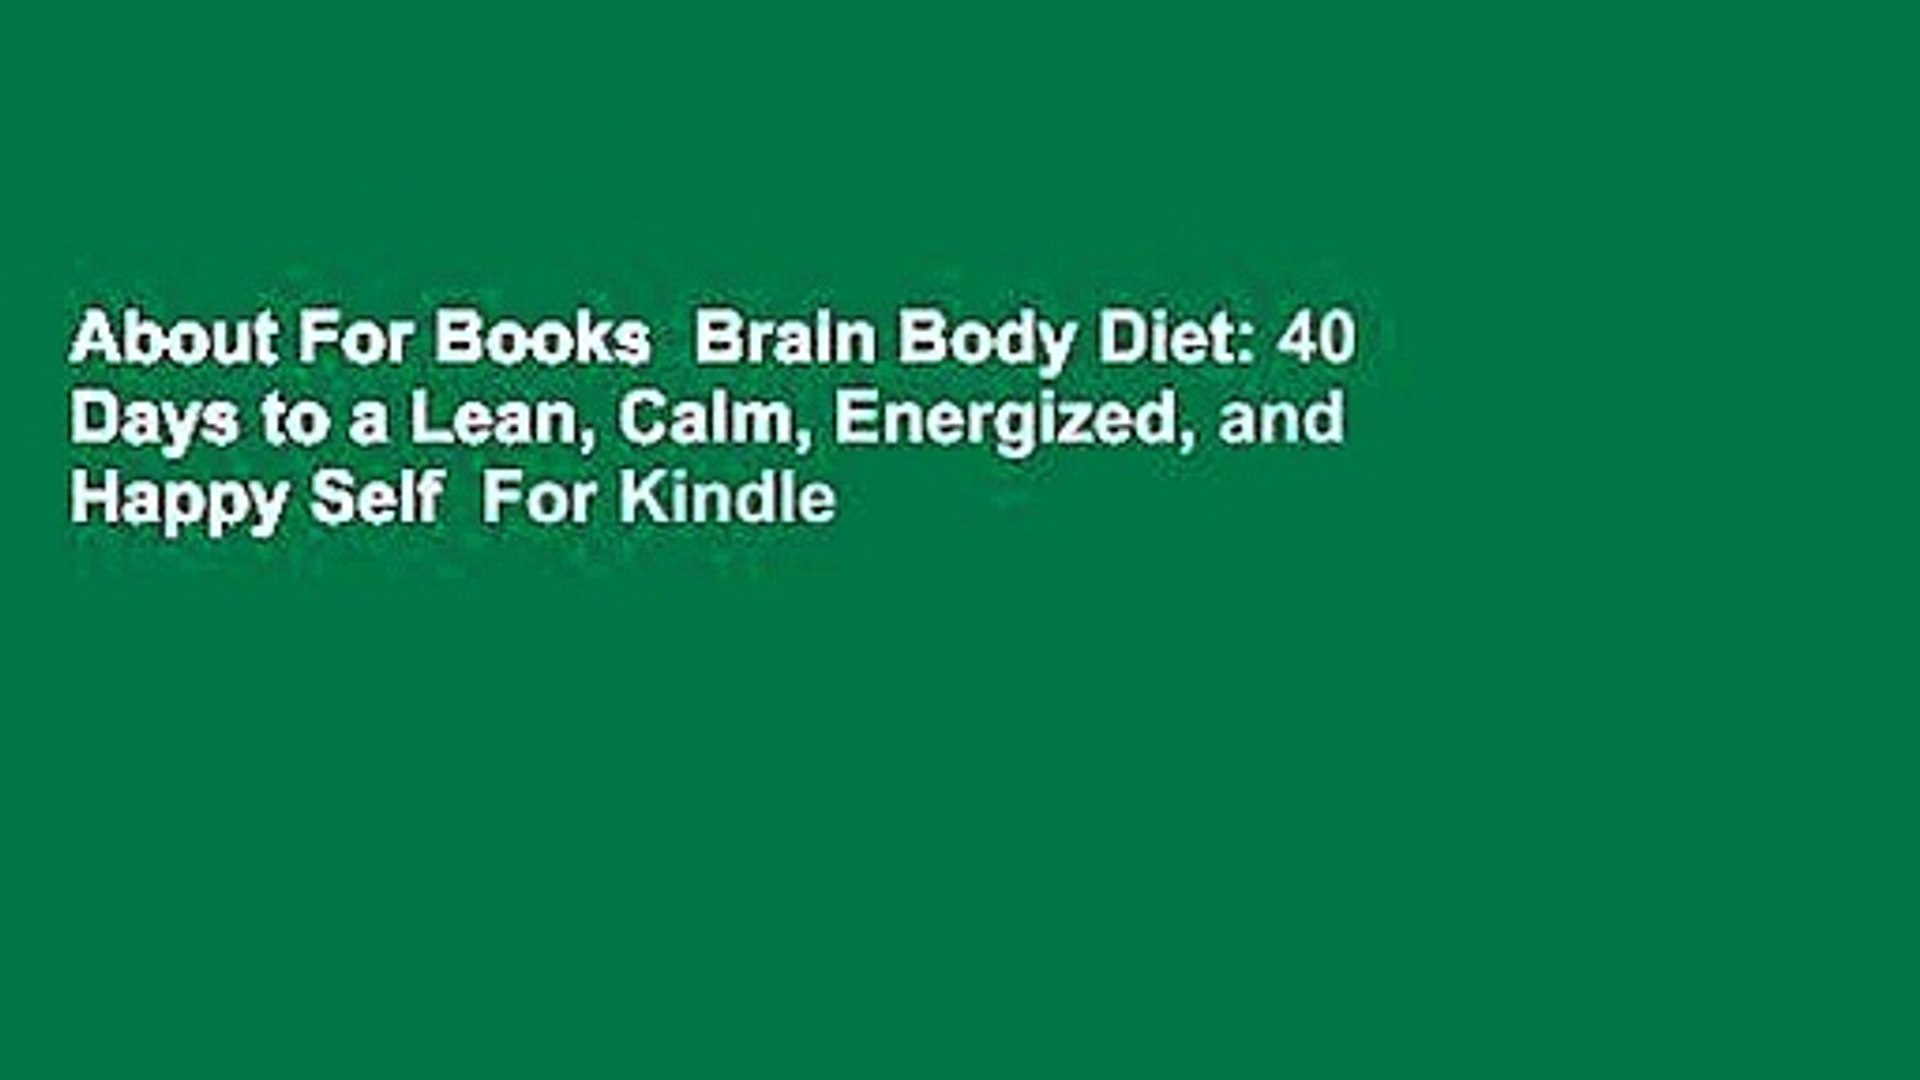 About For Books  Brain Body Diet: 40 Days to a Lean, Calm, Energized, and Happy Self  For Kindle